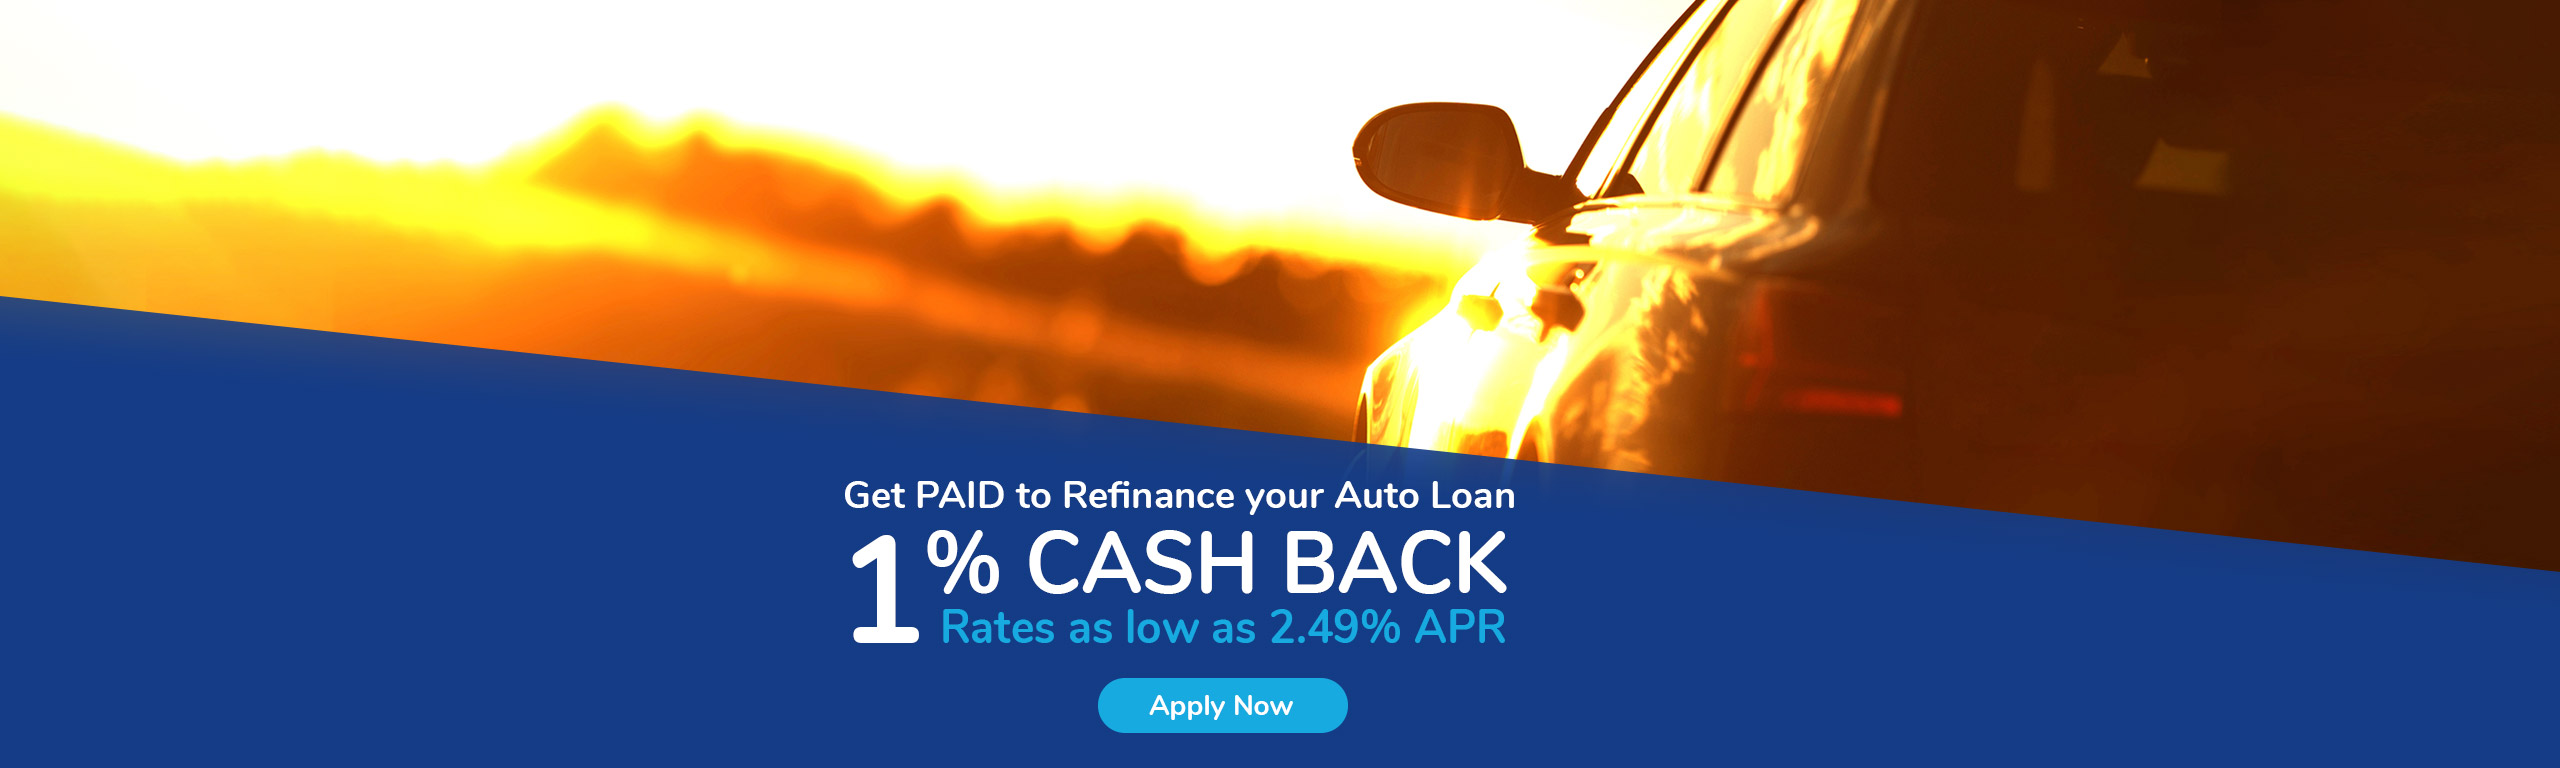 Get Paid to refinance your auto loan. 1% Cash Back with rates as low as 2.74% APR